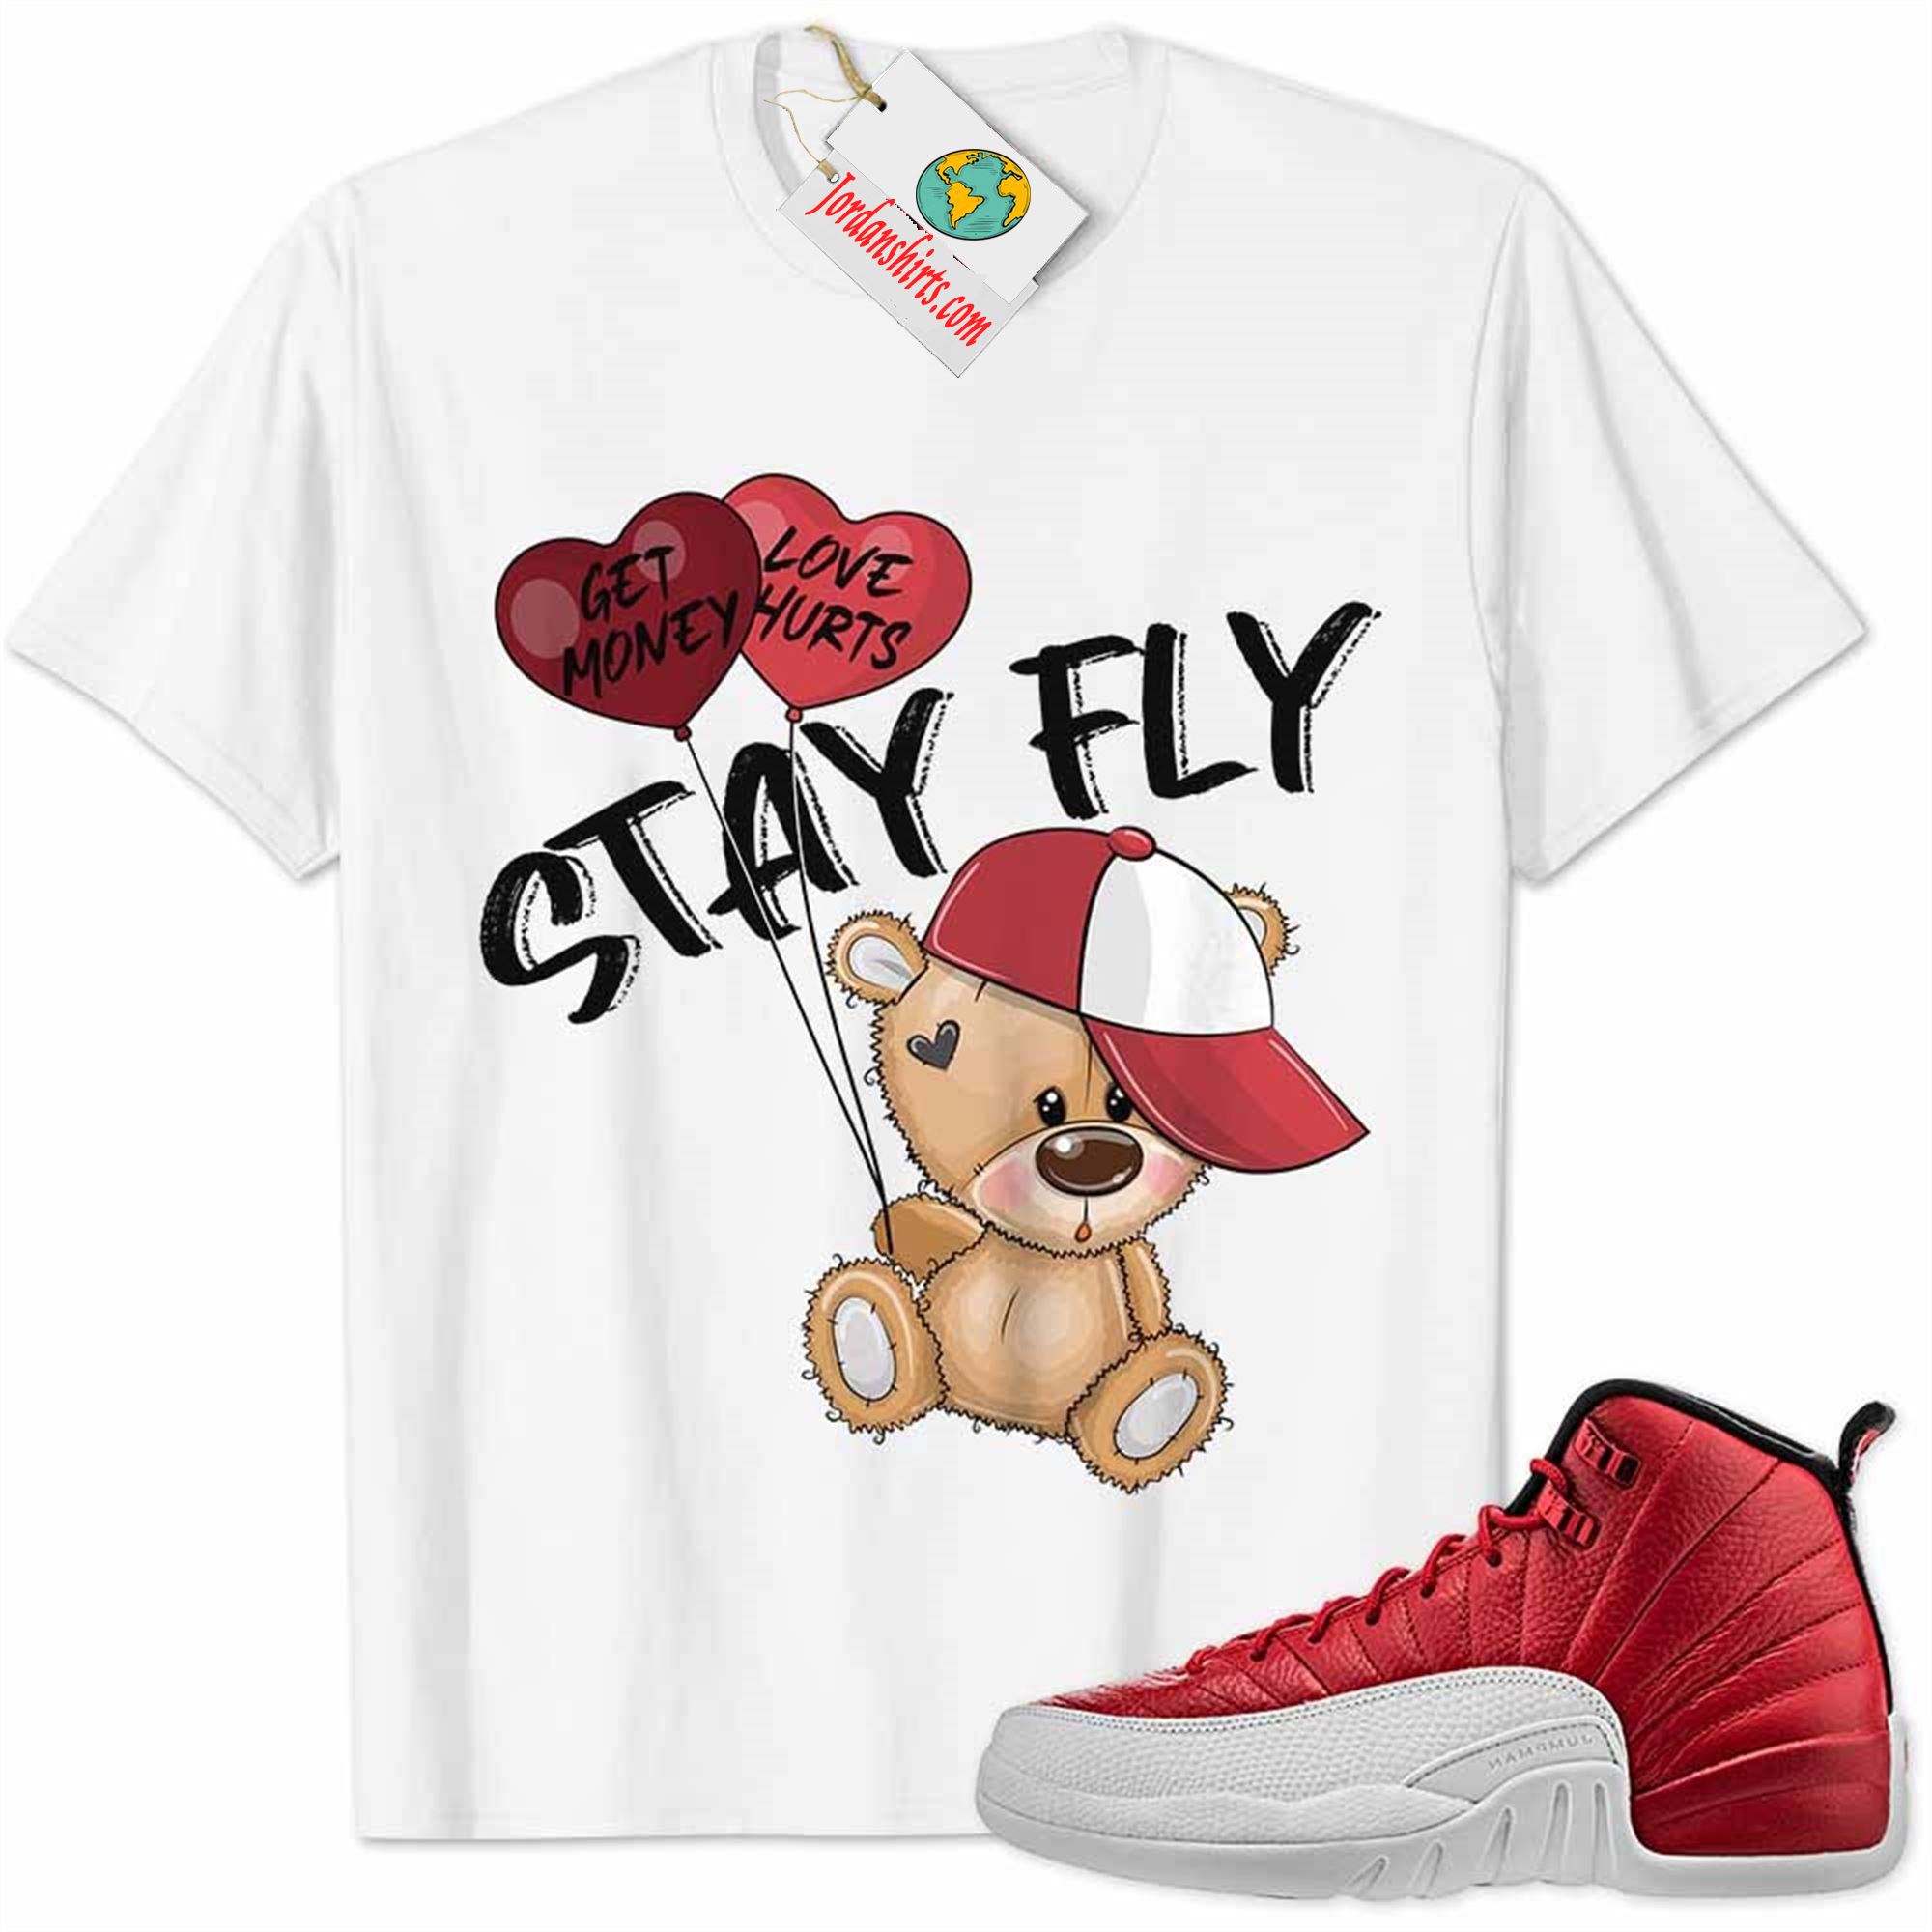 Jordan 12 Shirt, Gym Red 12s Shirt Cute Teddy Bear Stay Fly Get Money White Full Size Up To 5xl